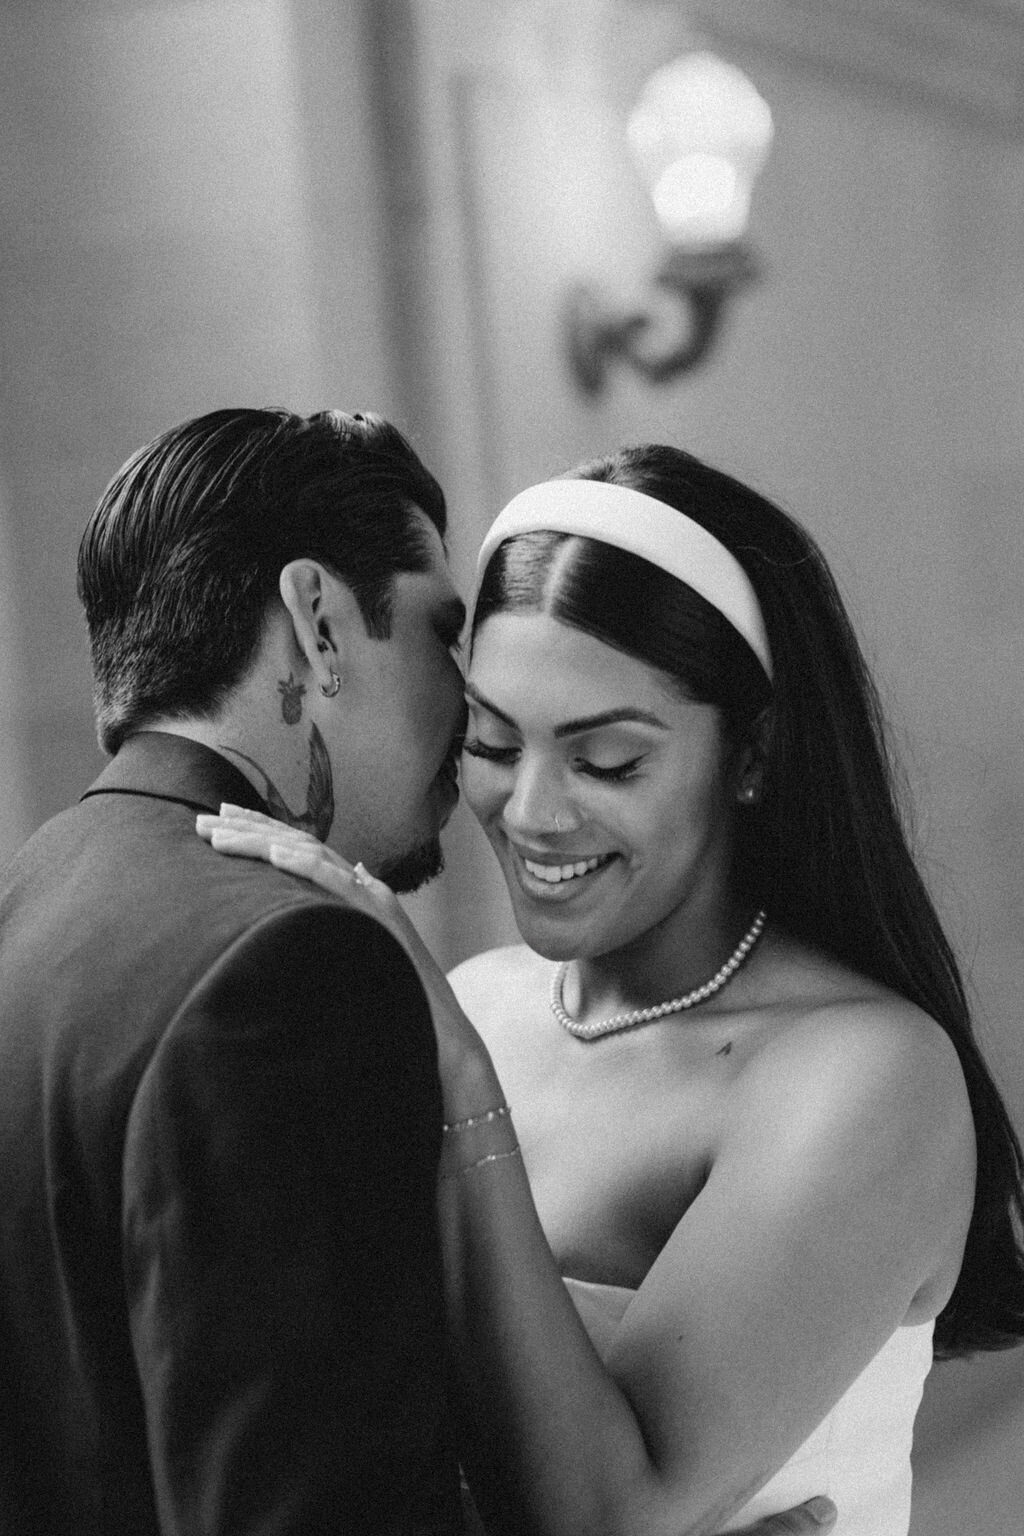 A black and white photo of a groom embracing his bride as she smiles, both dressed in elopement attire with the bride wearing a pearl necklace and headband during their photoshoot in San Francisco